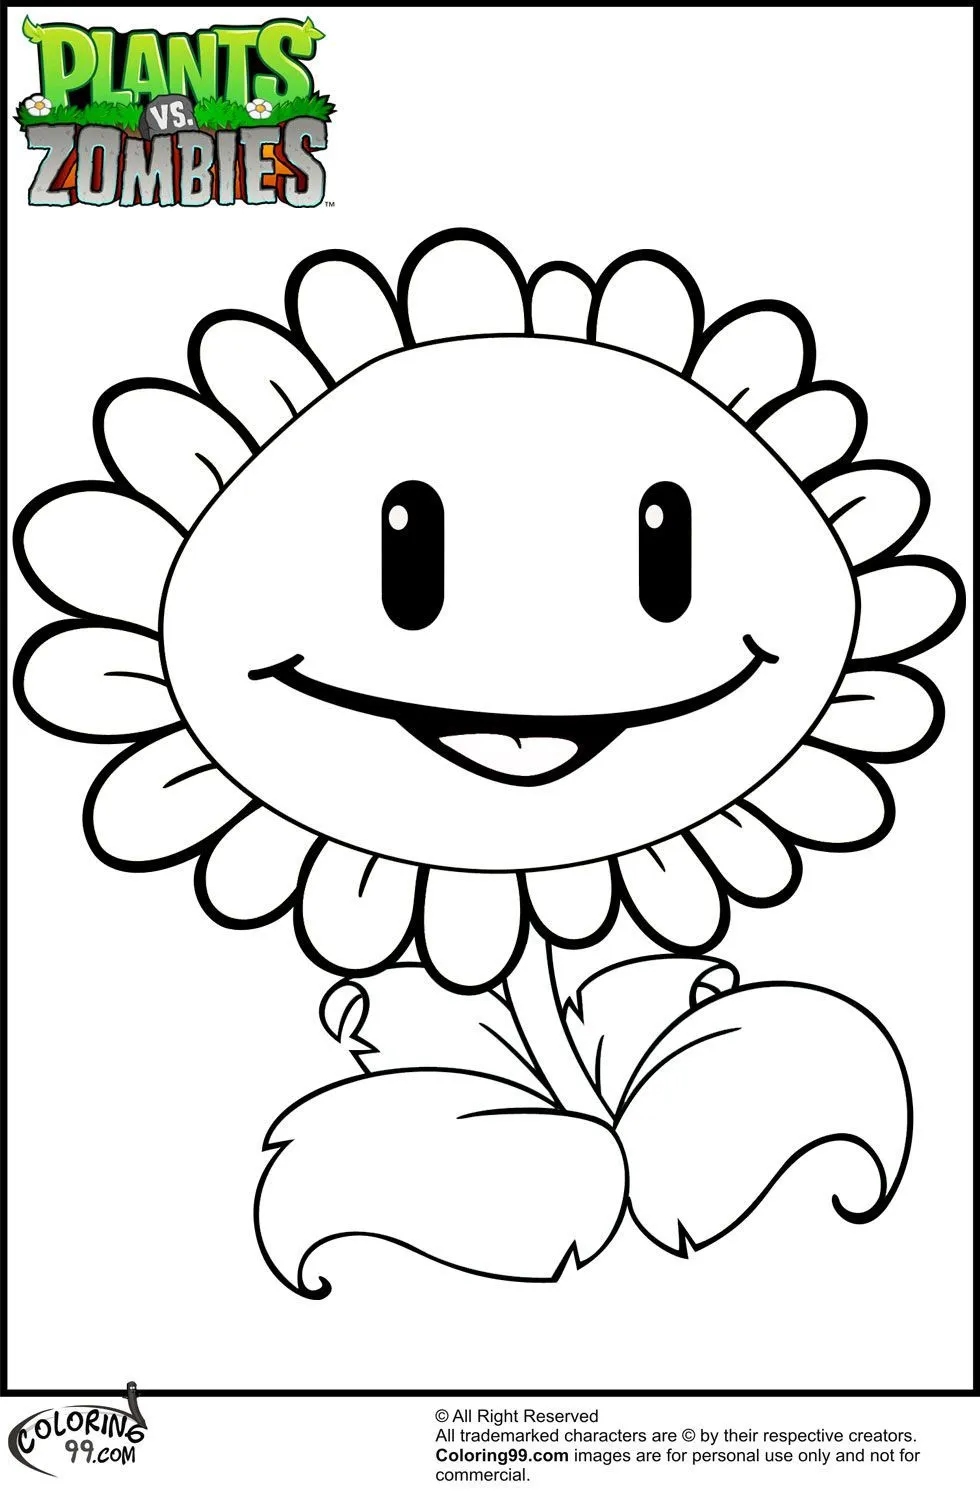 Plants VS Zombies Coloring Pages | Team colors | Dominic 8th ...